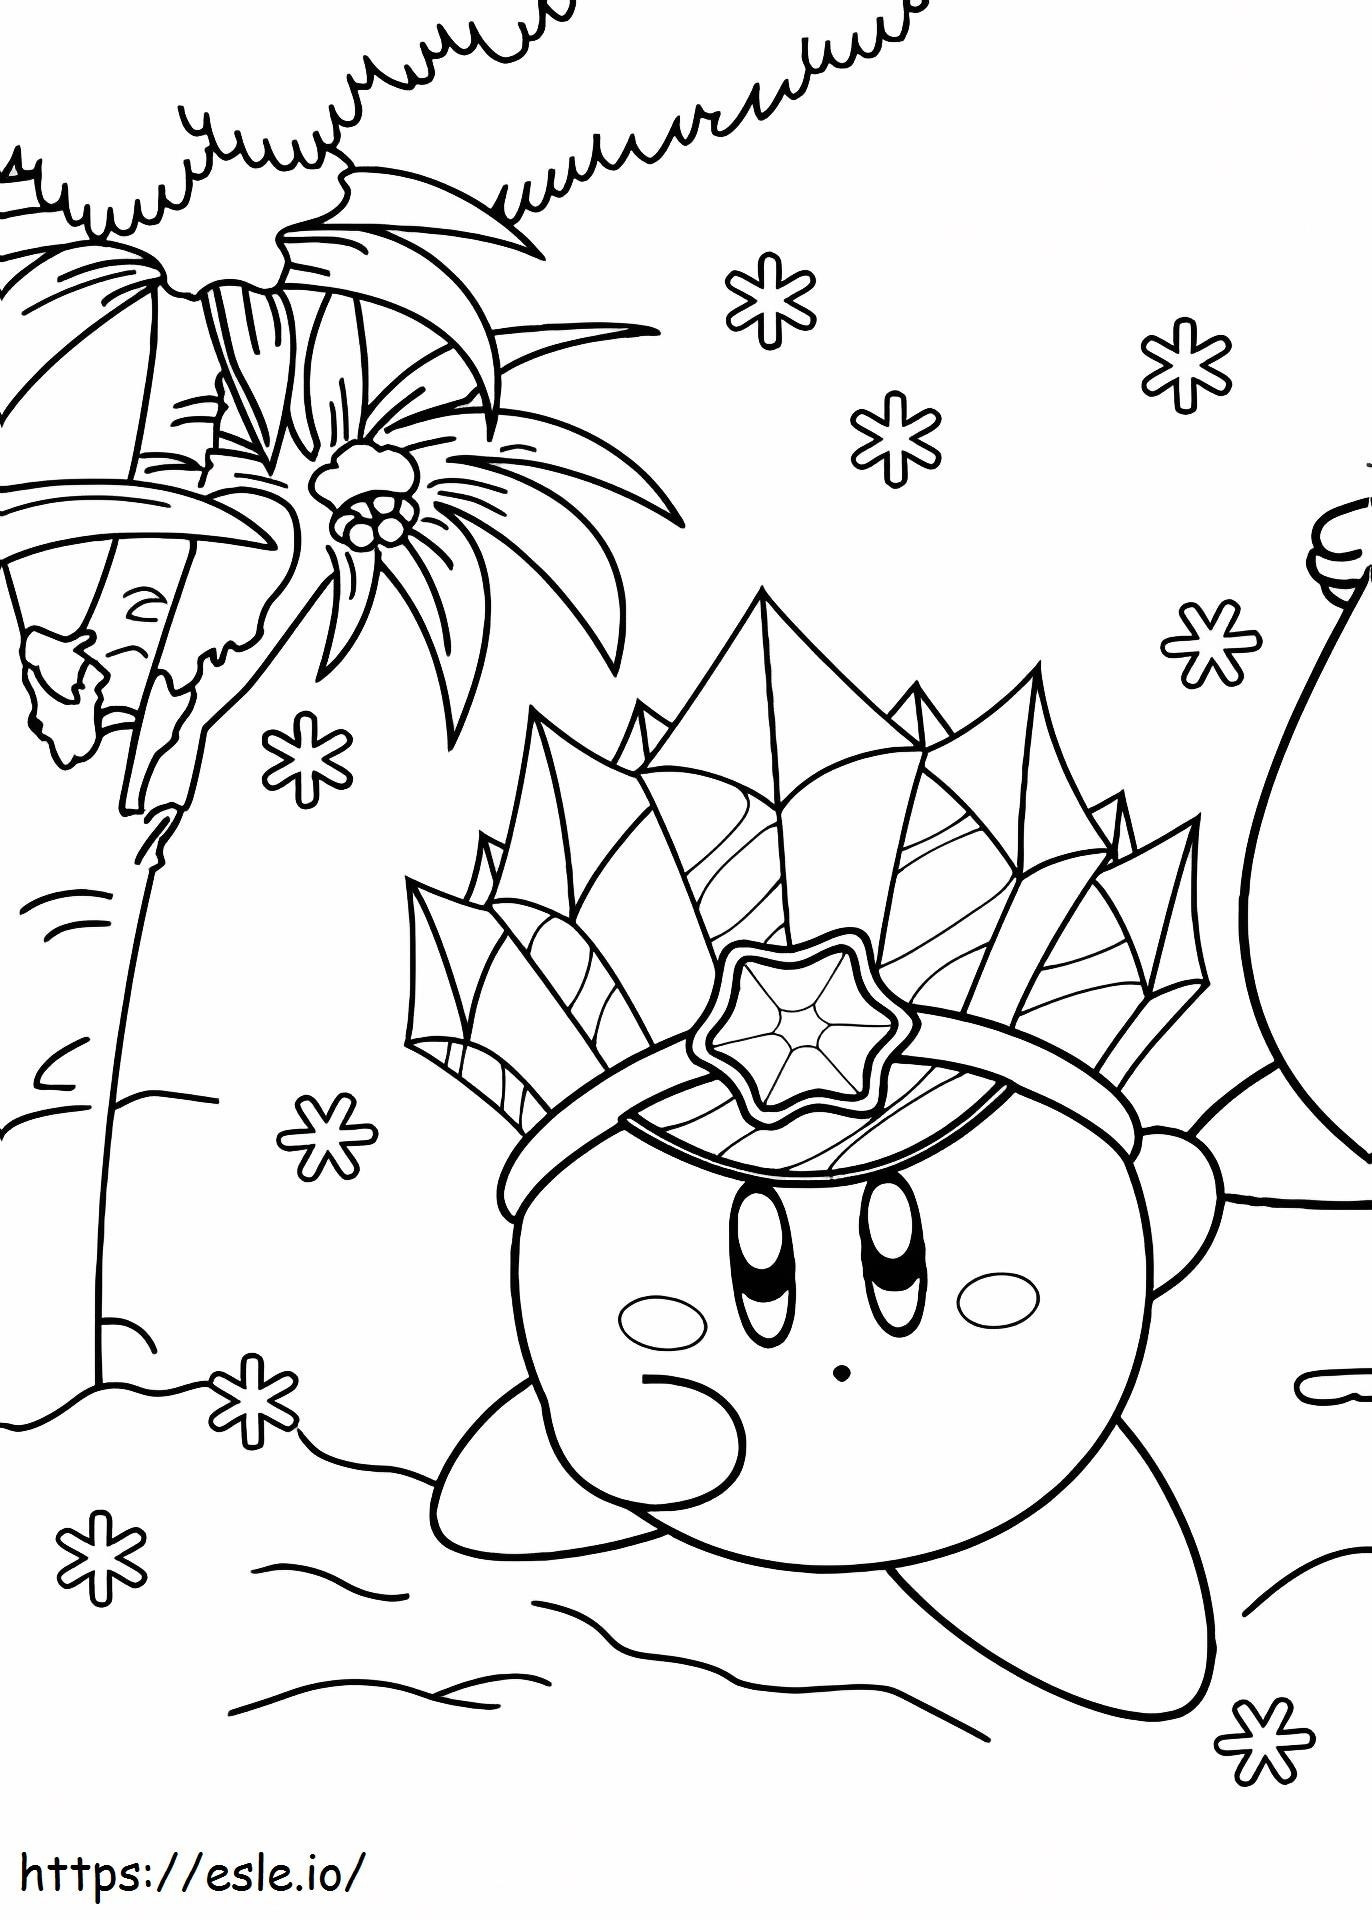 1528855758 Ice Kirby coloring page